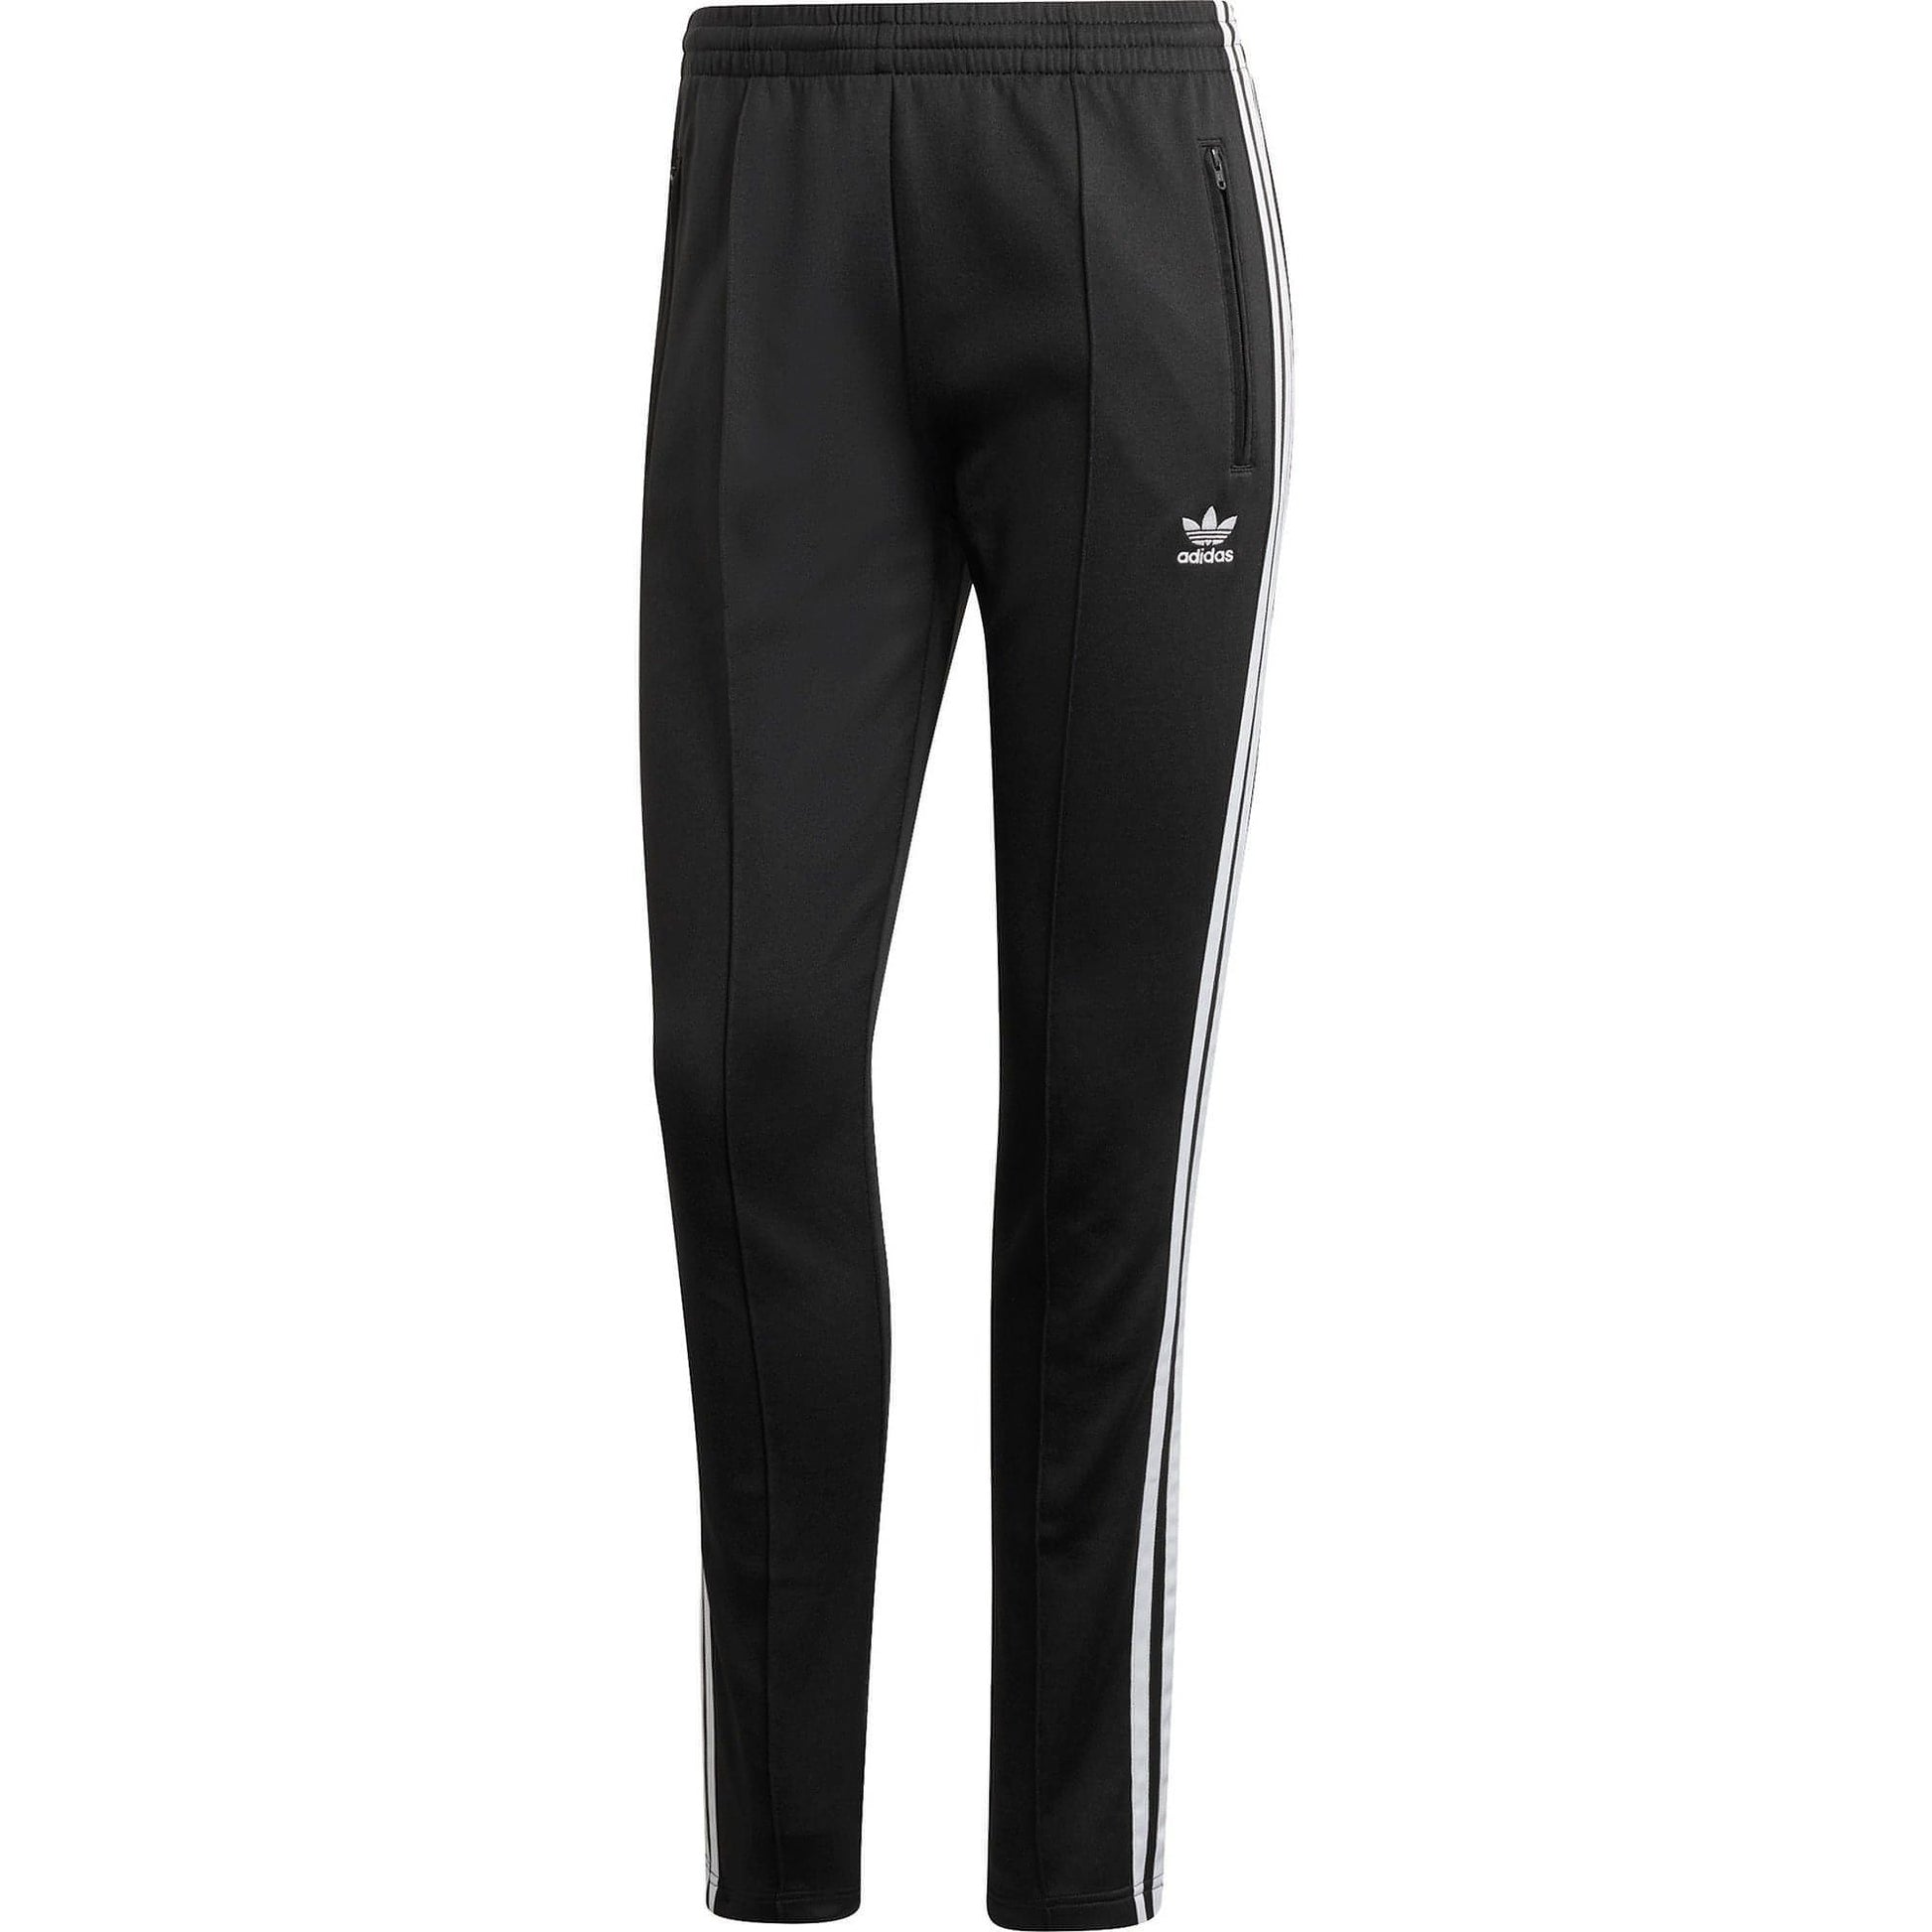 Adidas Primeblue Sst Joggers Gd2361 Front - Front View